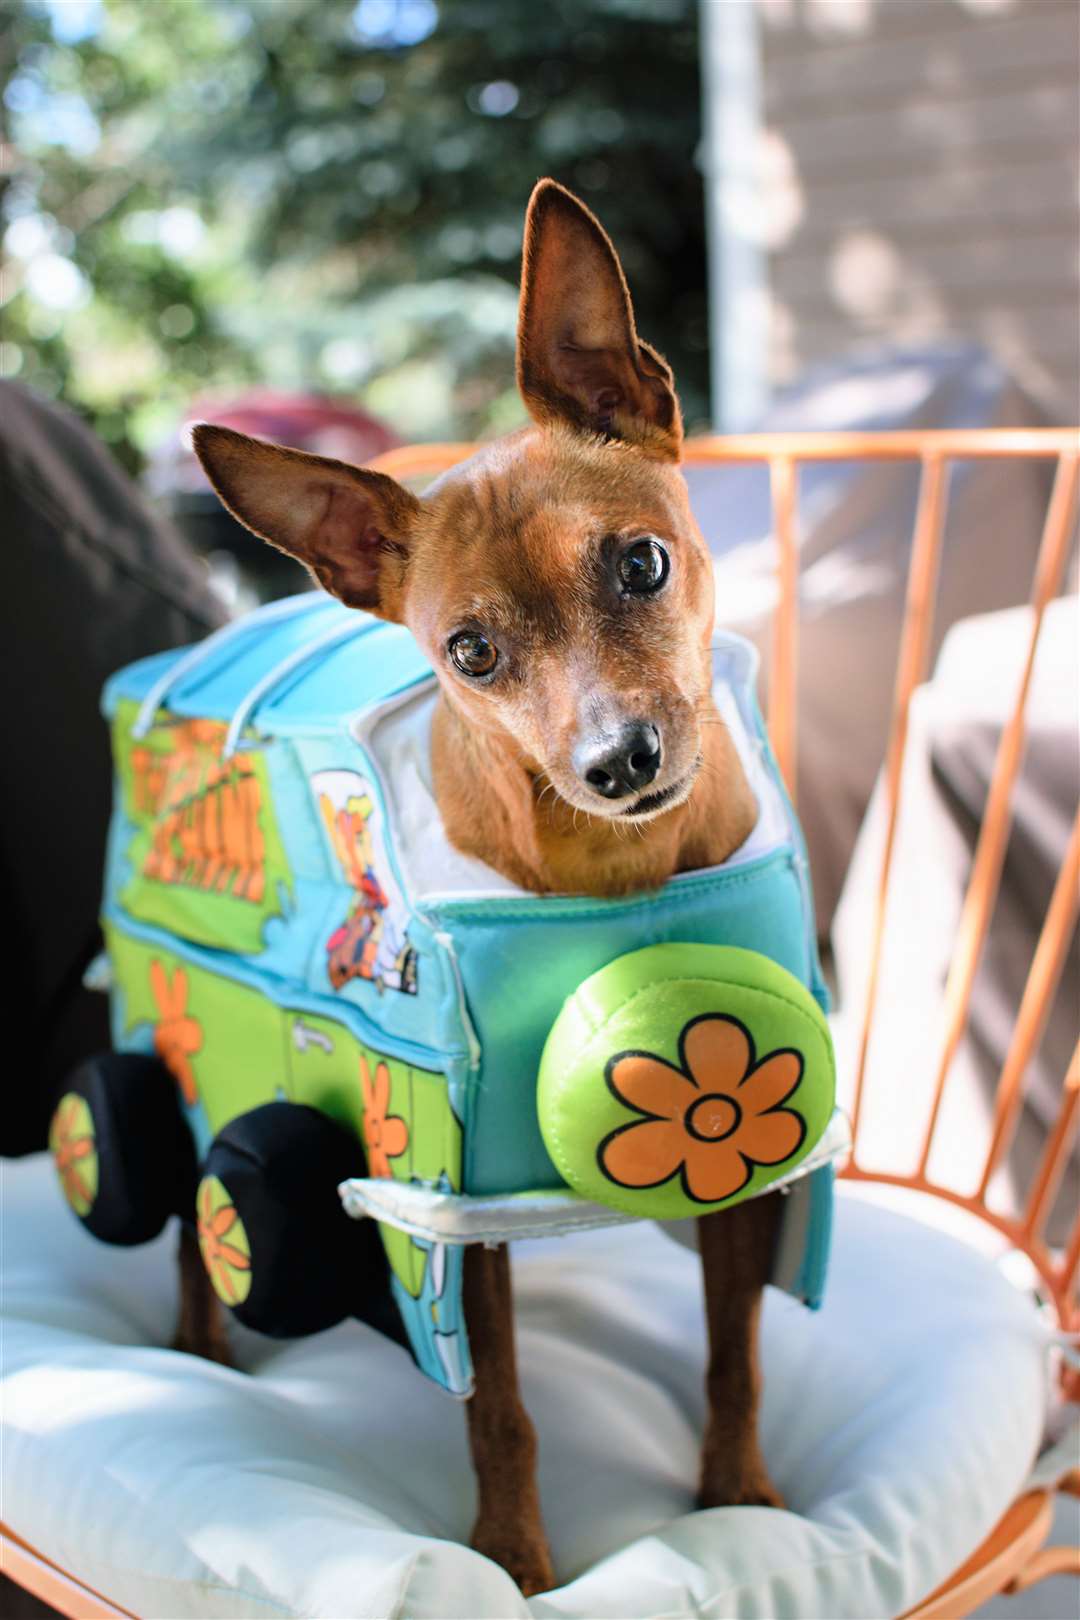 Is that Scooby's nephew Scrappy Doo? The cartoon series is still popular more than 50 years after it originally aired. You can even buy a Mystery Machine costume for your dog. Picture: Adobe Stock